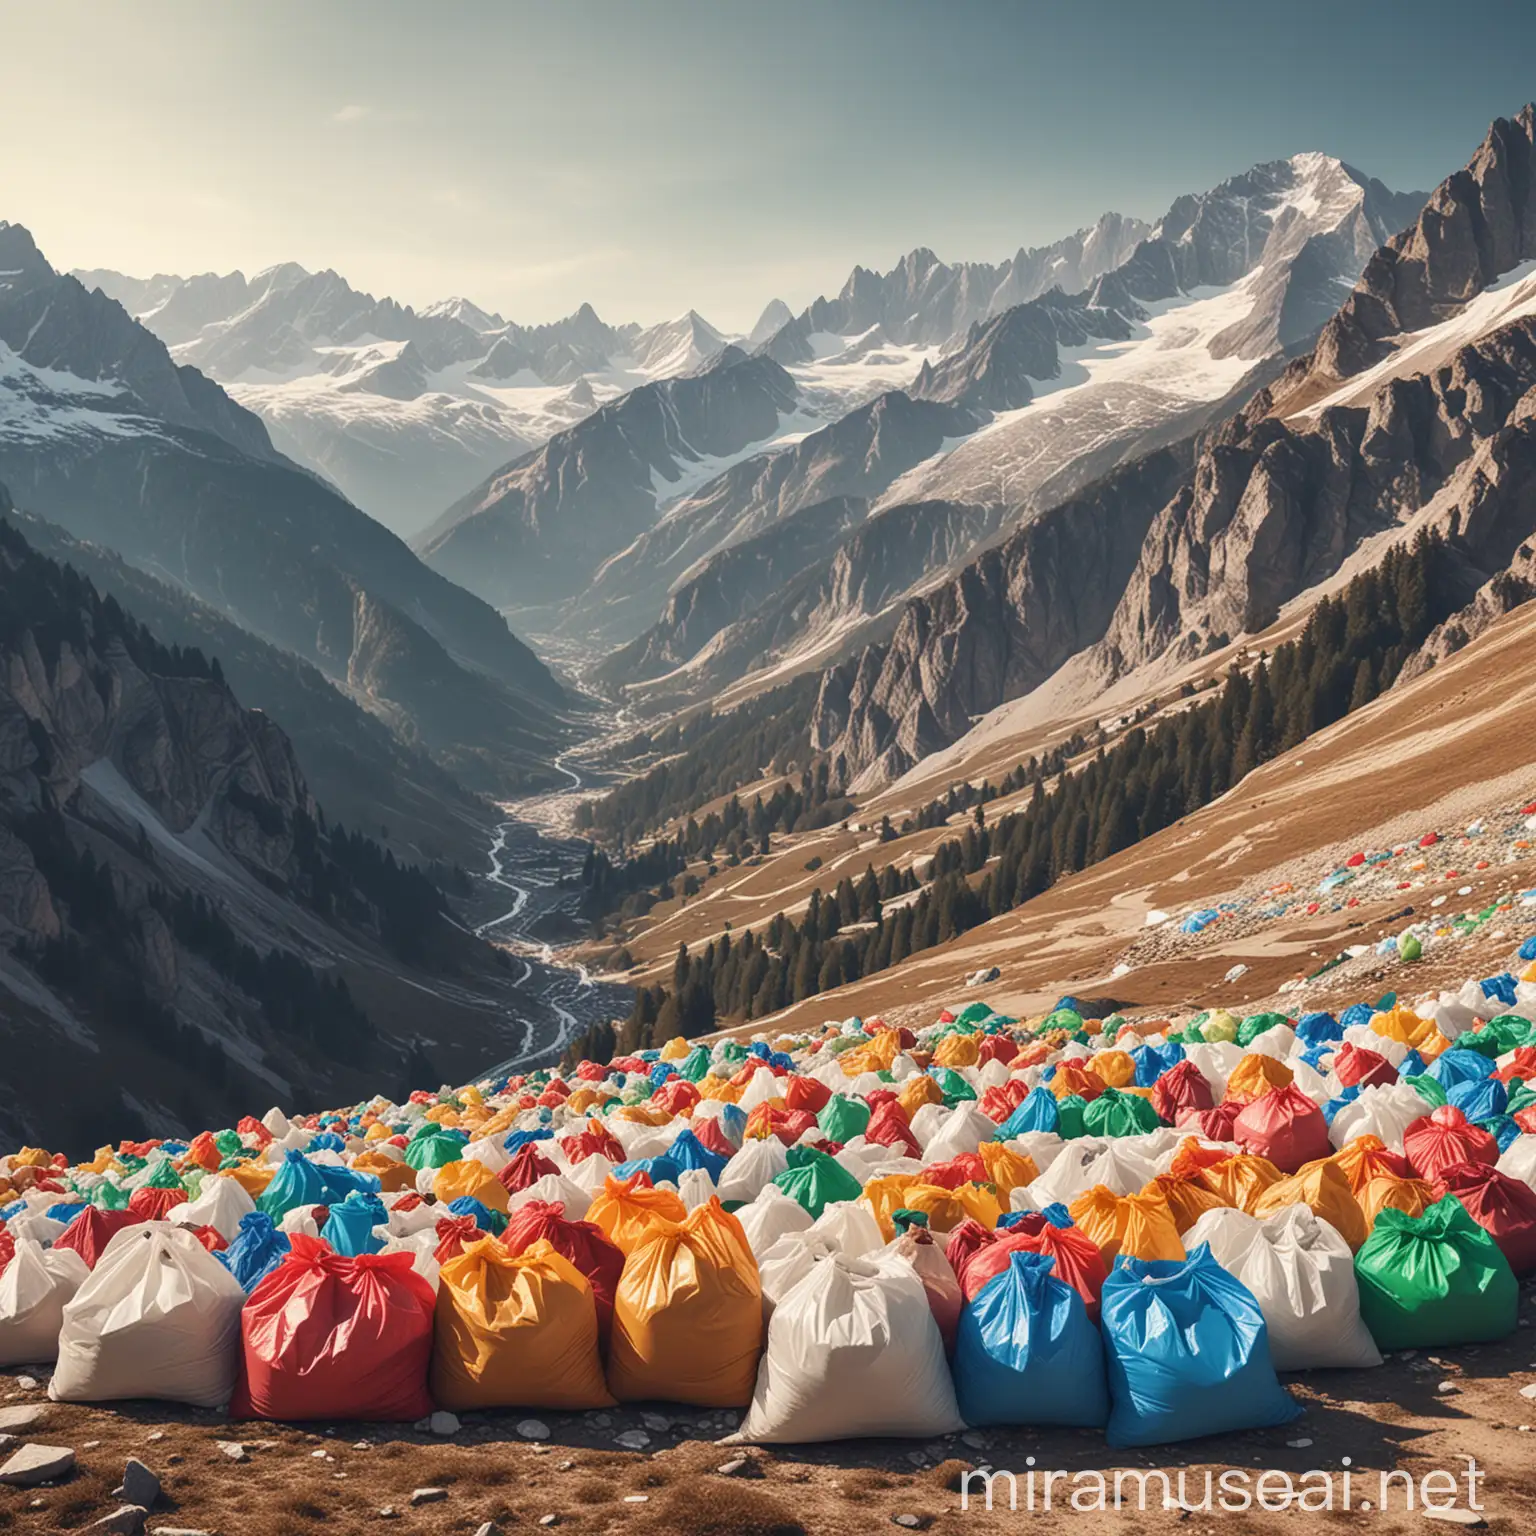 Alps Landscape with Scattered Plastic Bags Environmental Pollution in Mountainous Terrain